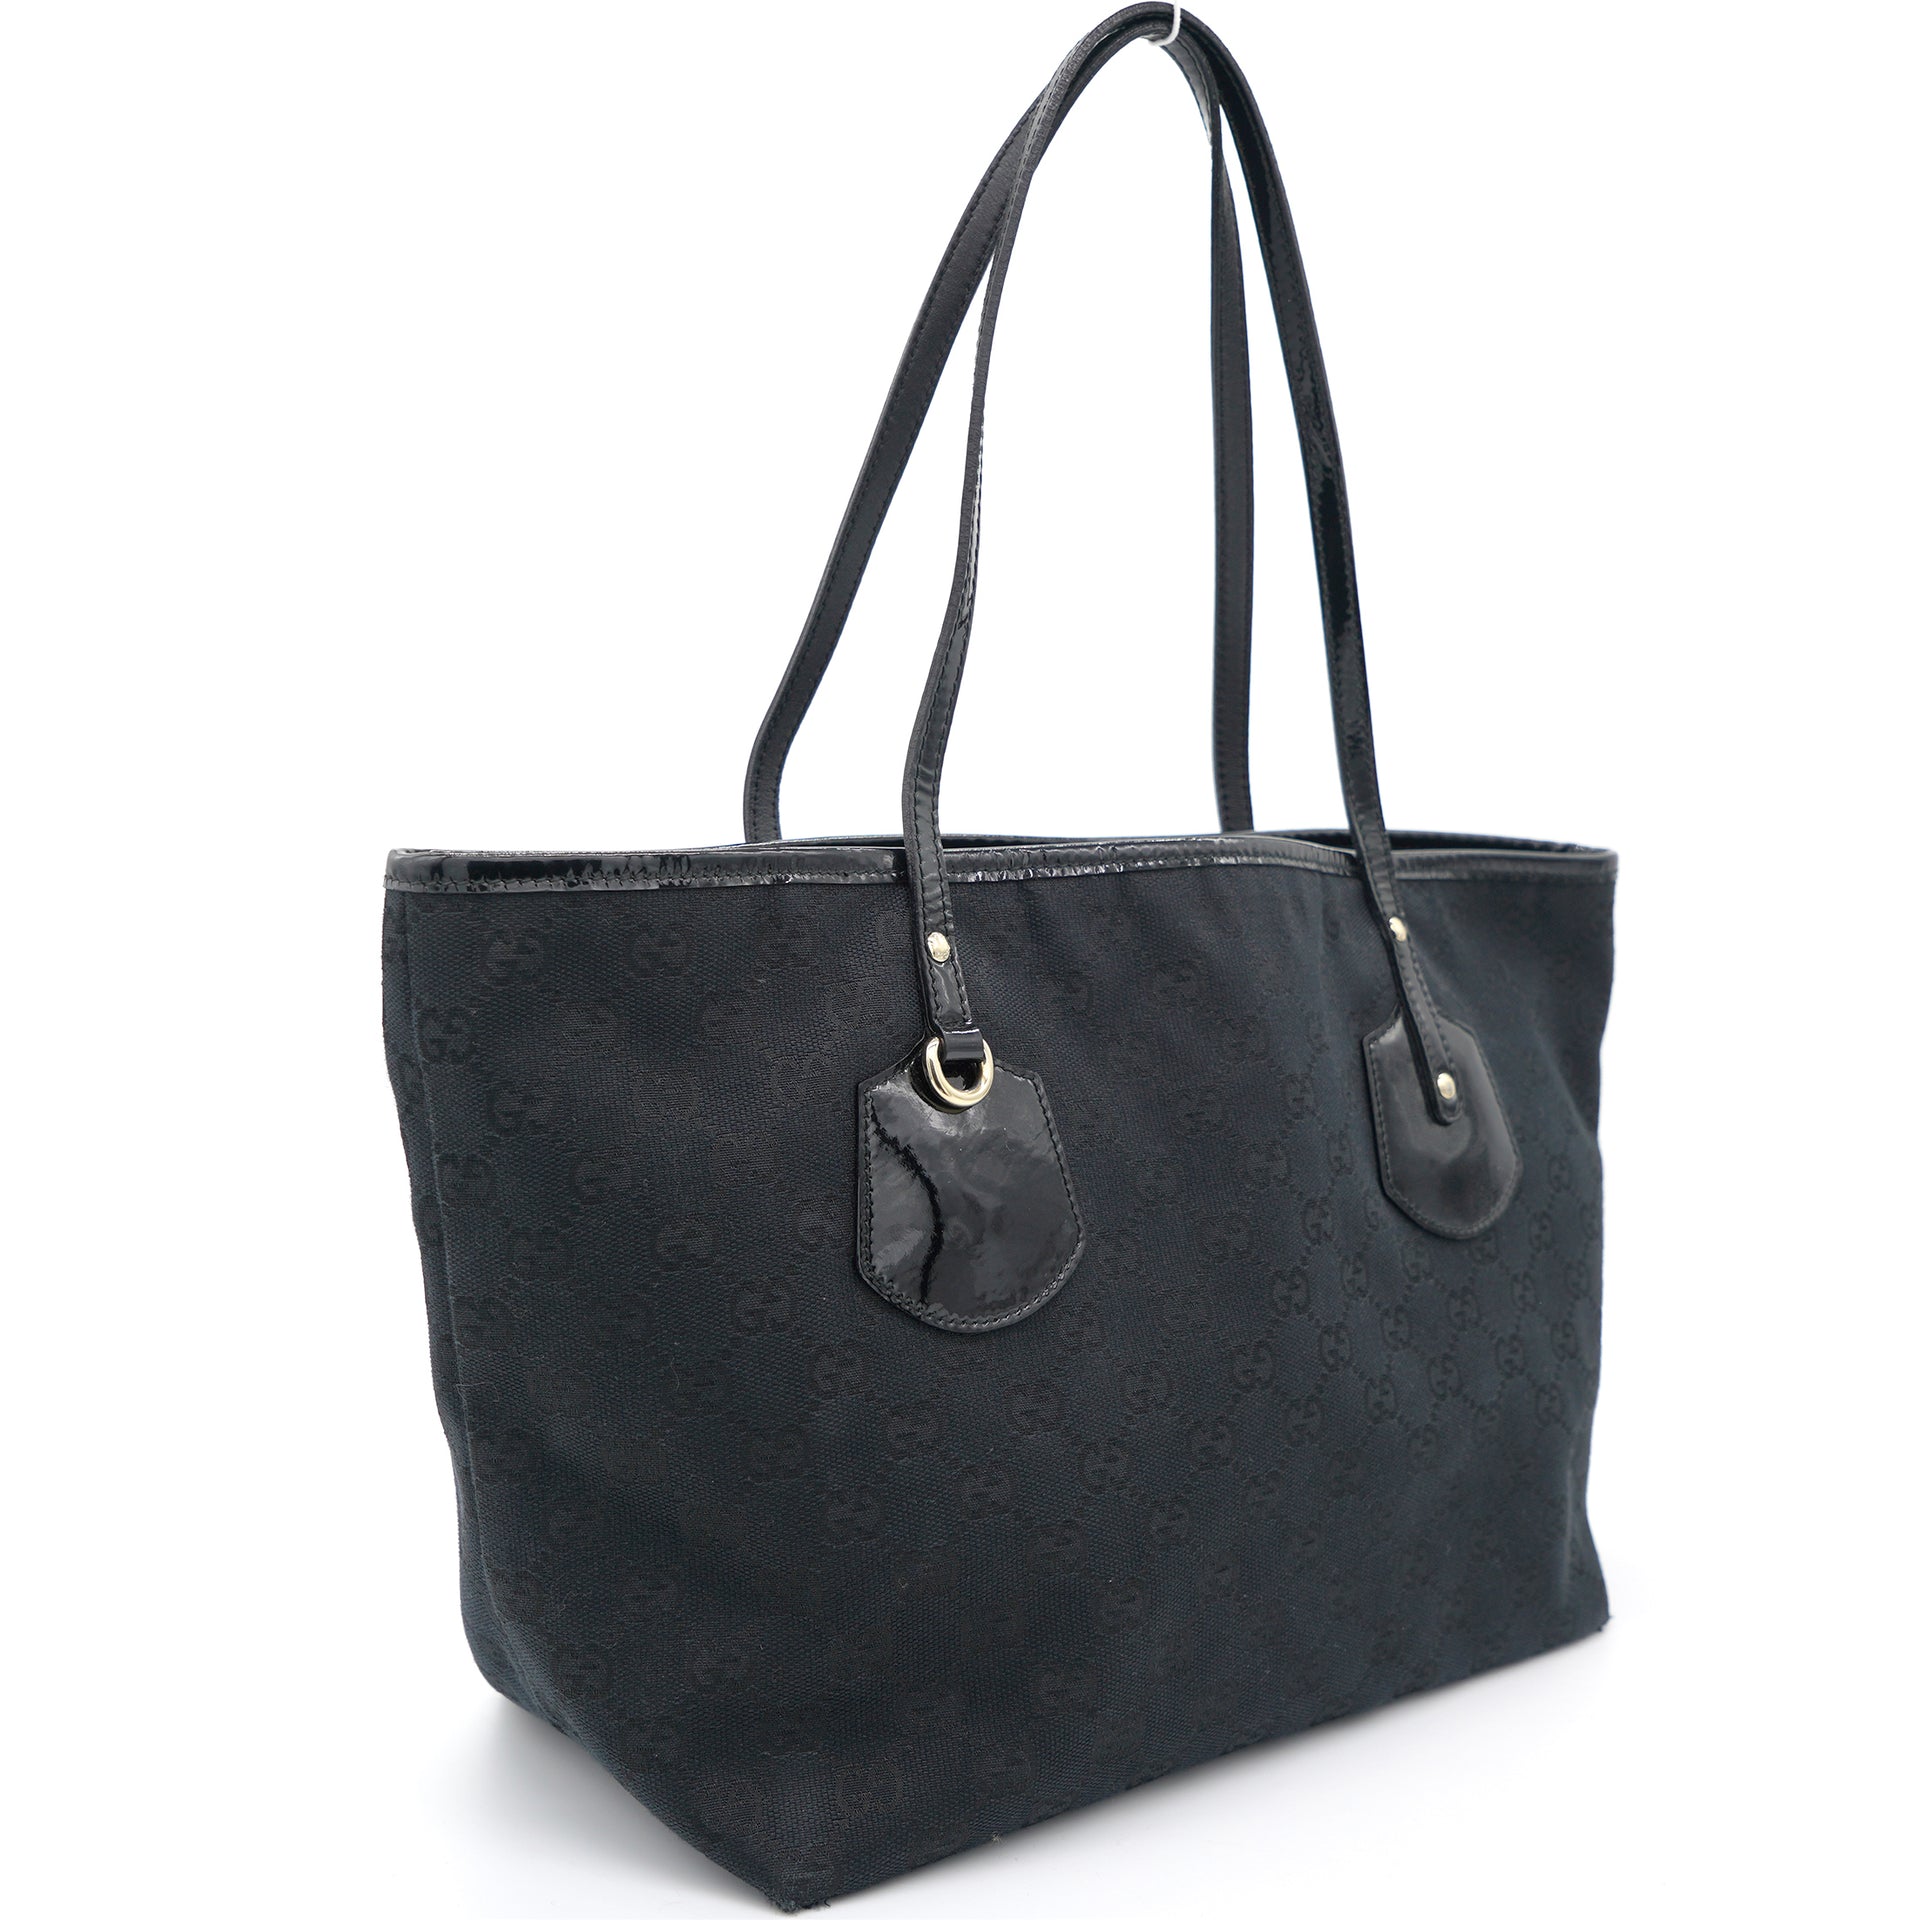 Black GG Canvas and Patent Leather Tote